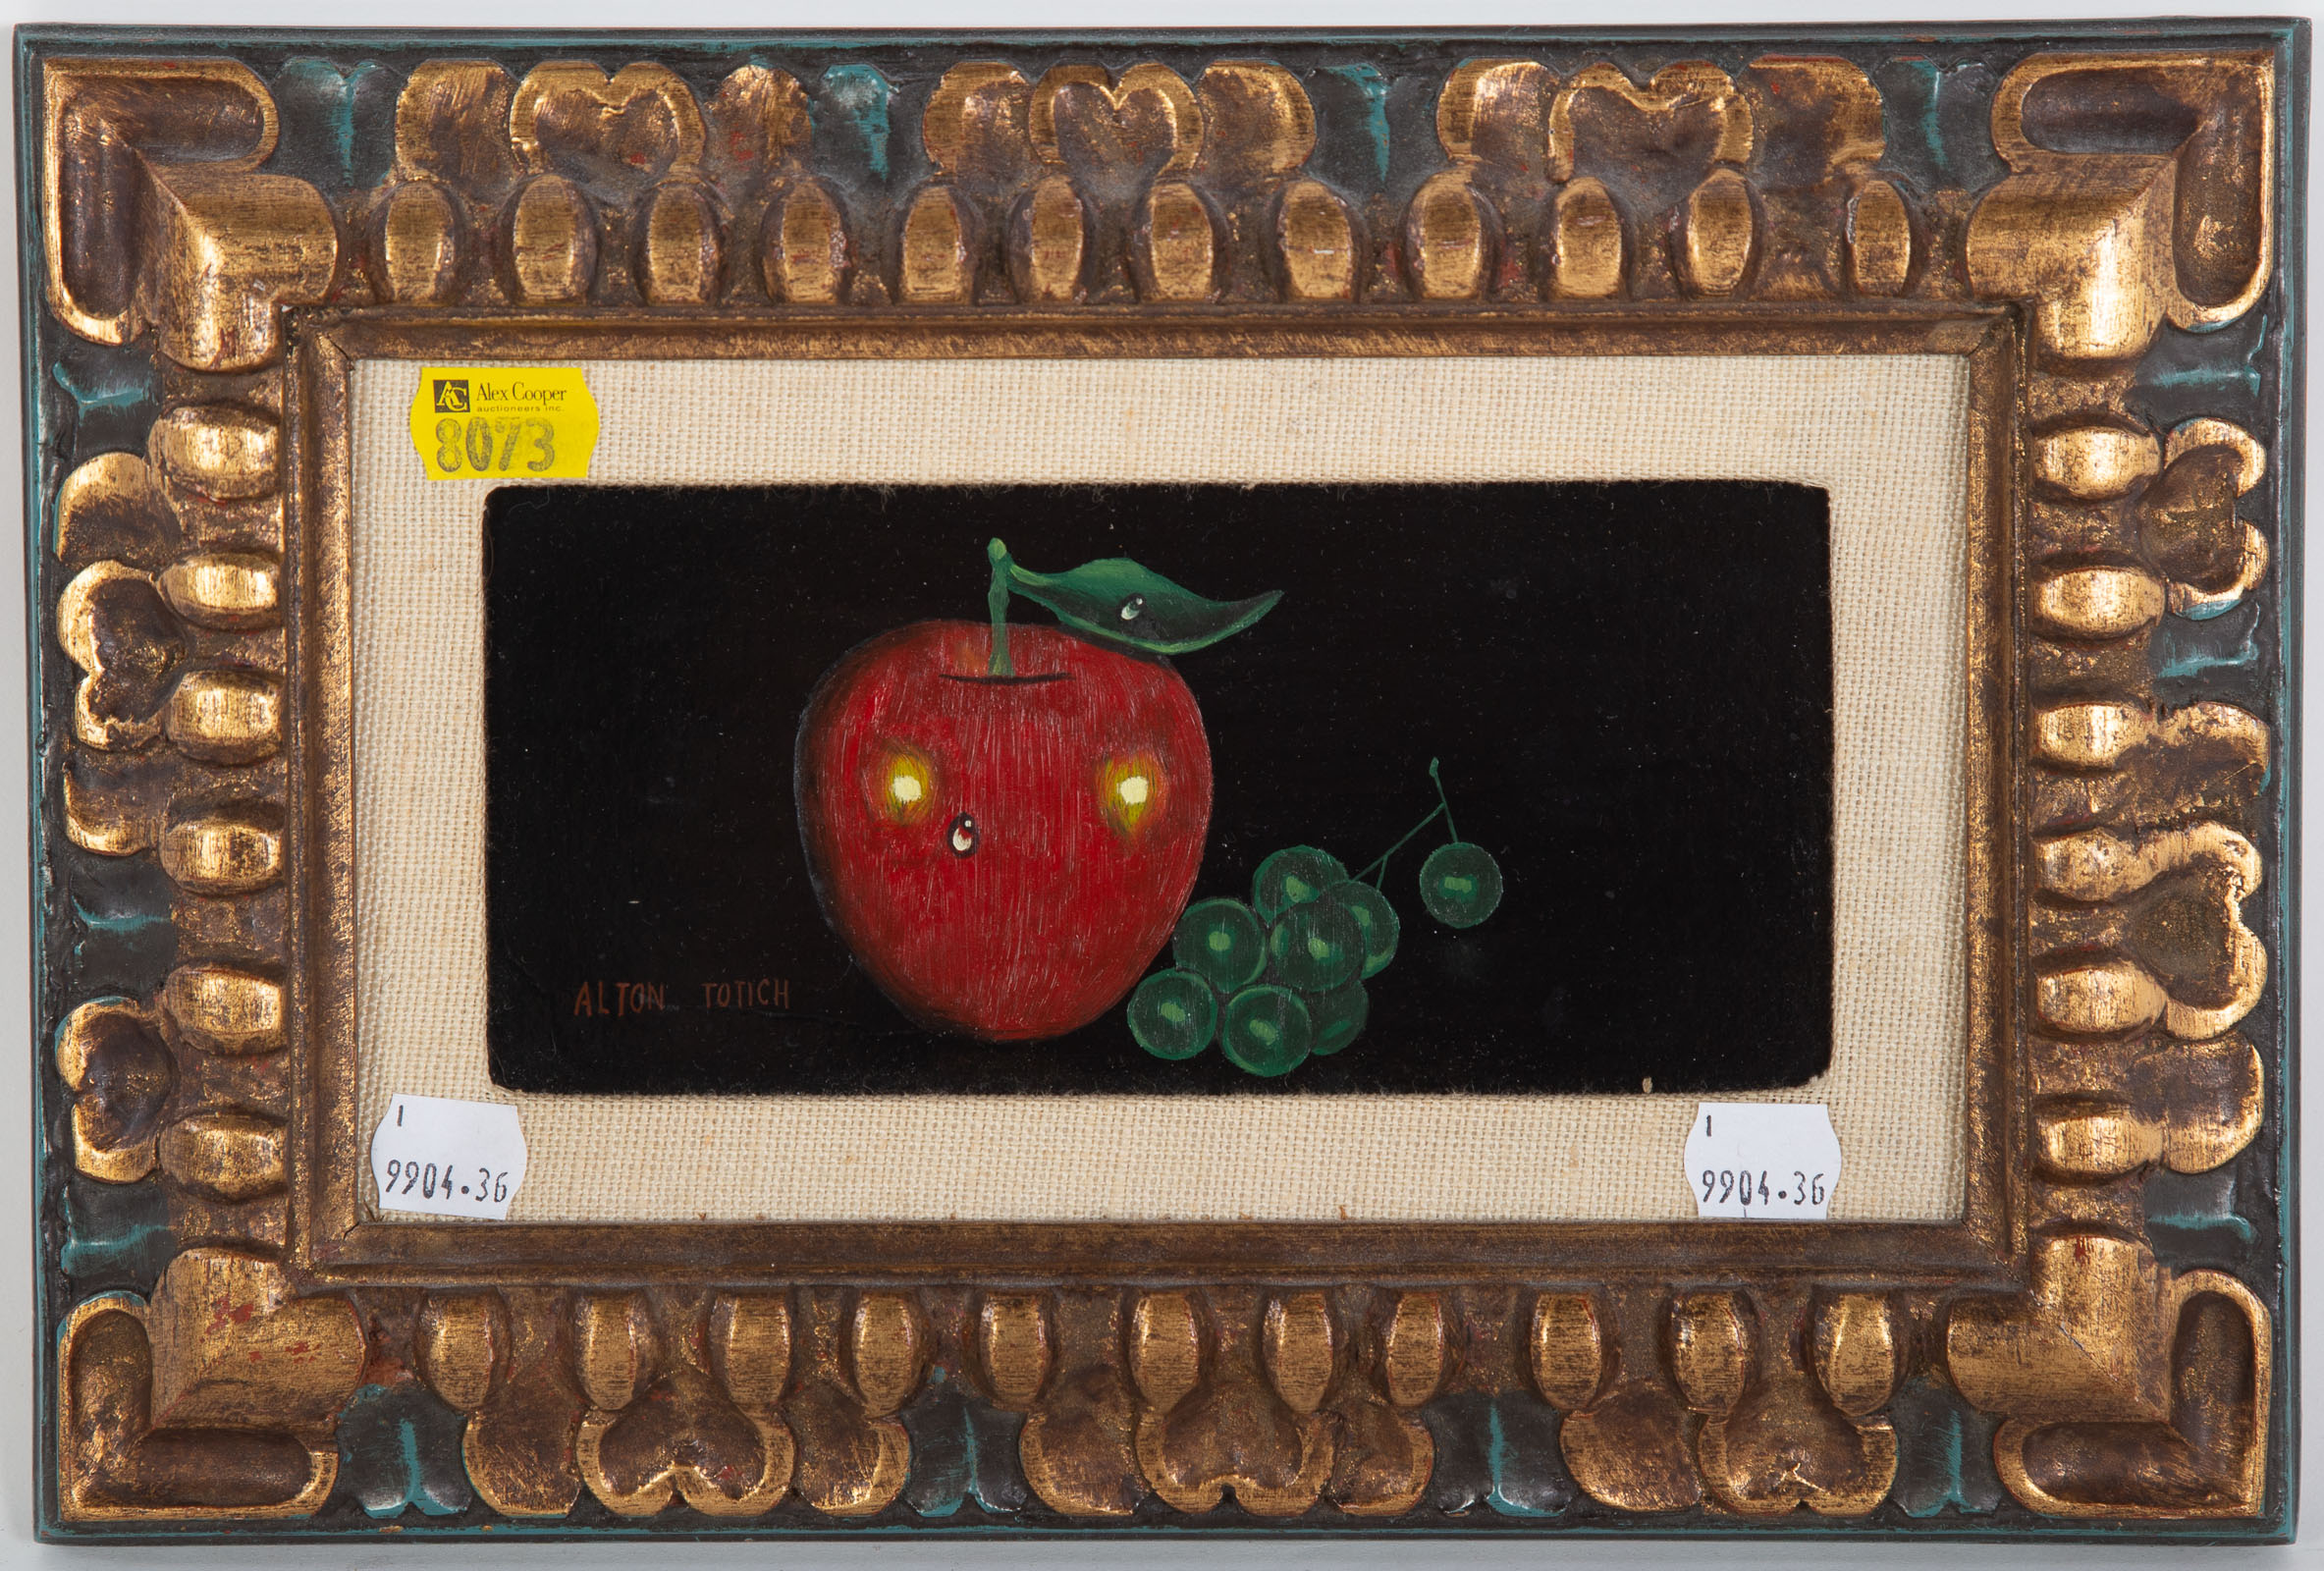 ALTON TONCH. APPLE AND GRAPES, OIL ON